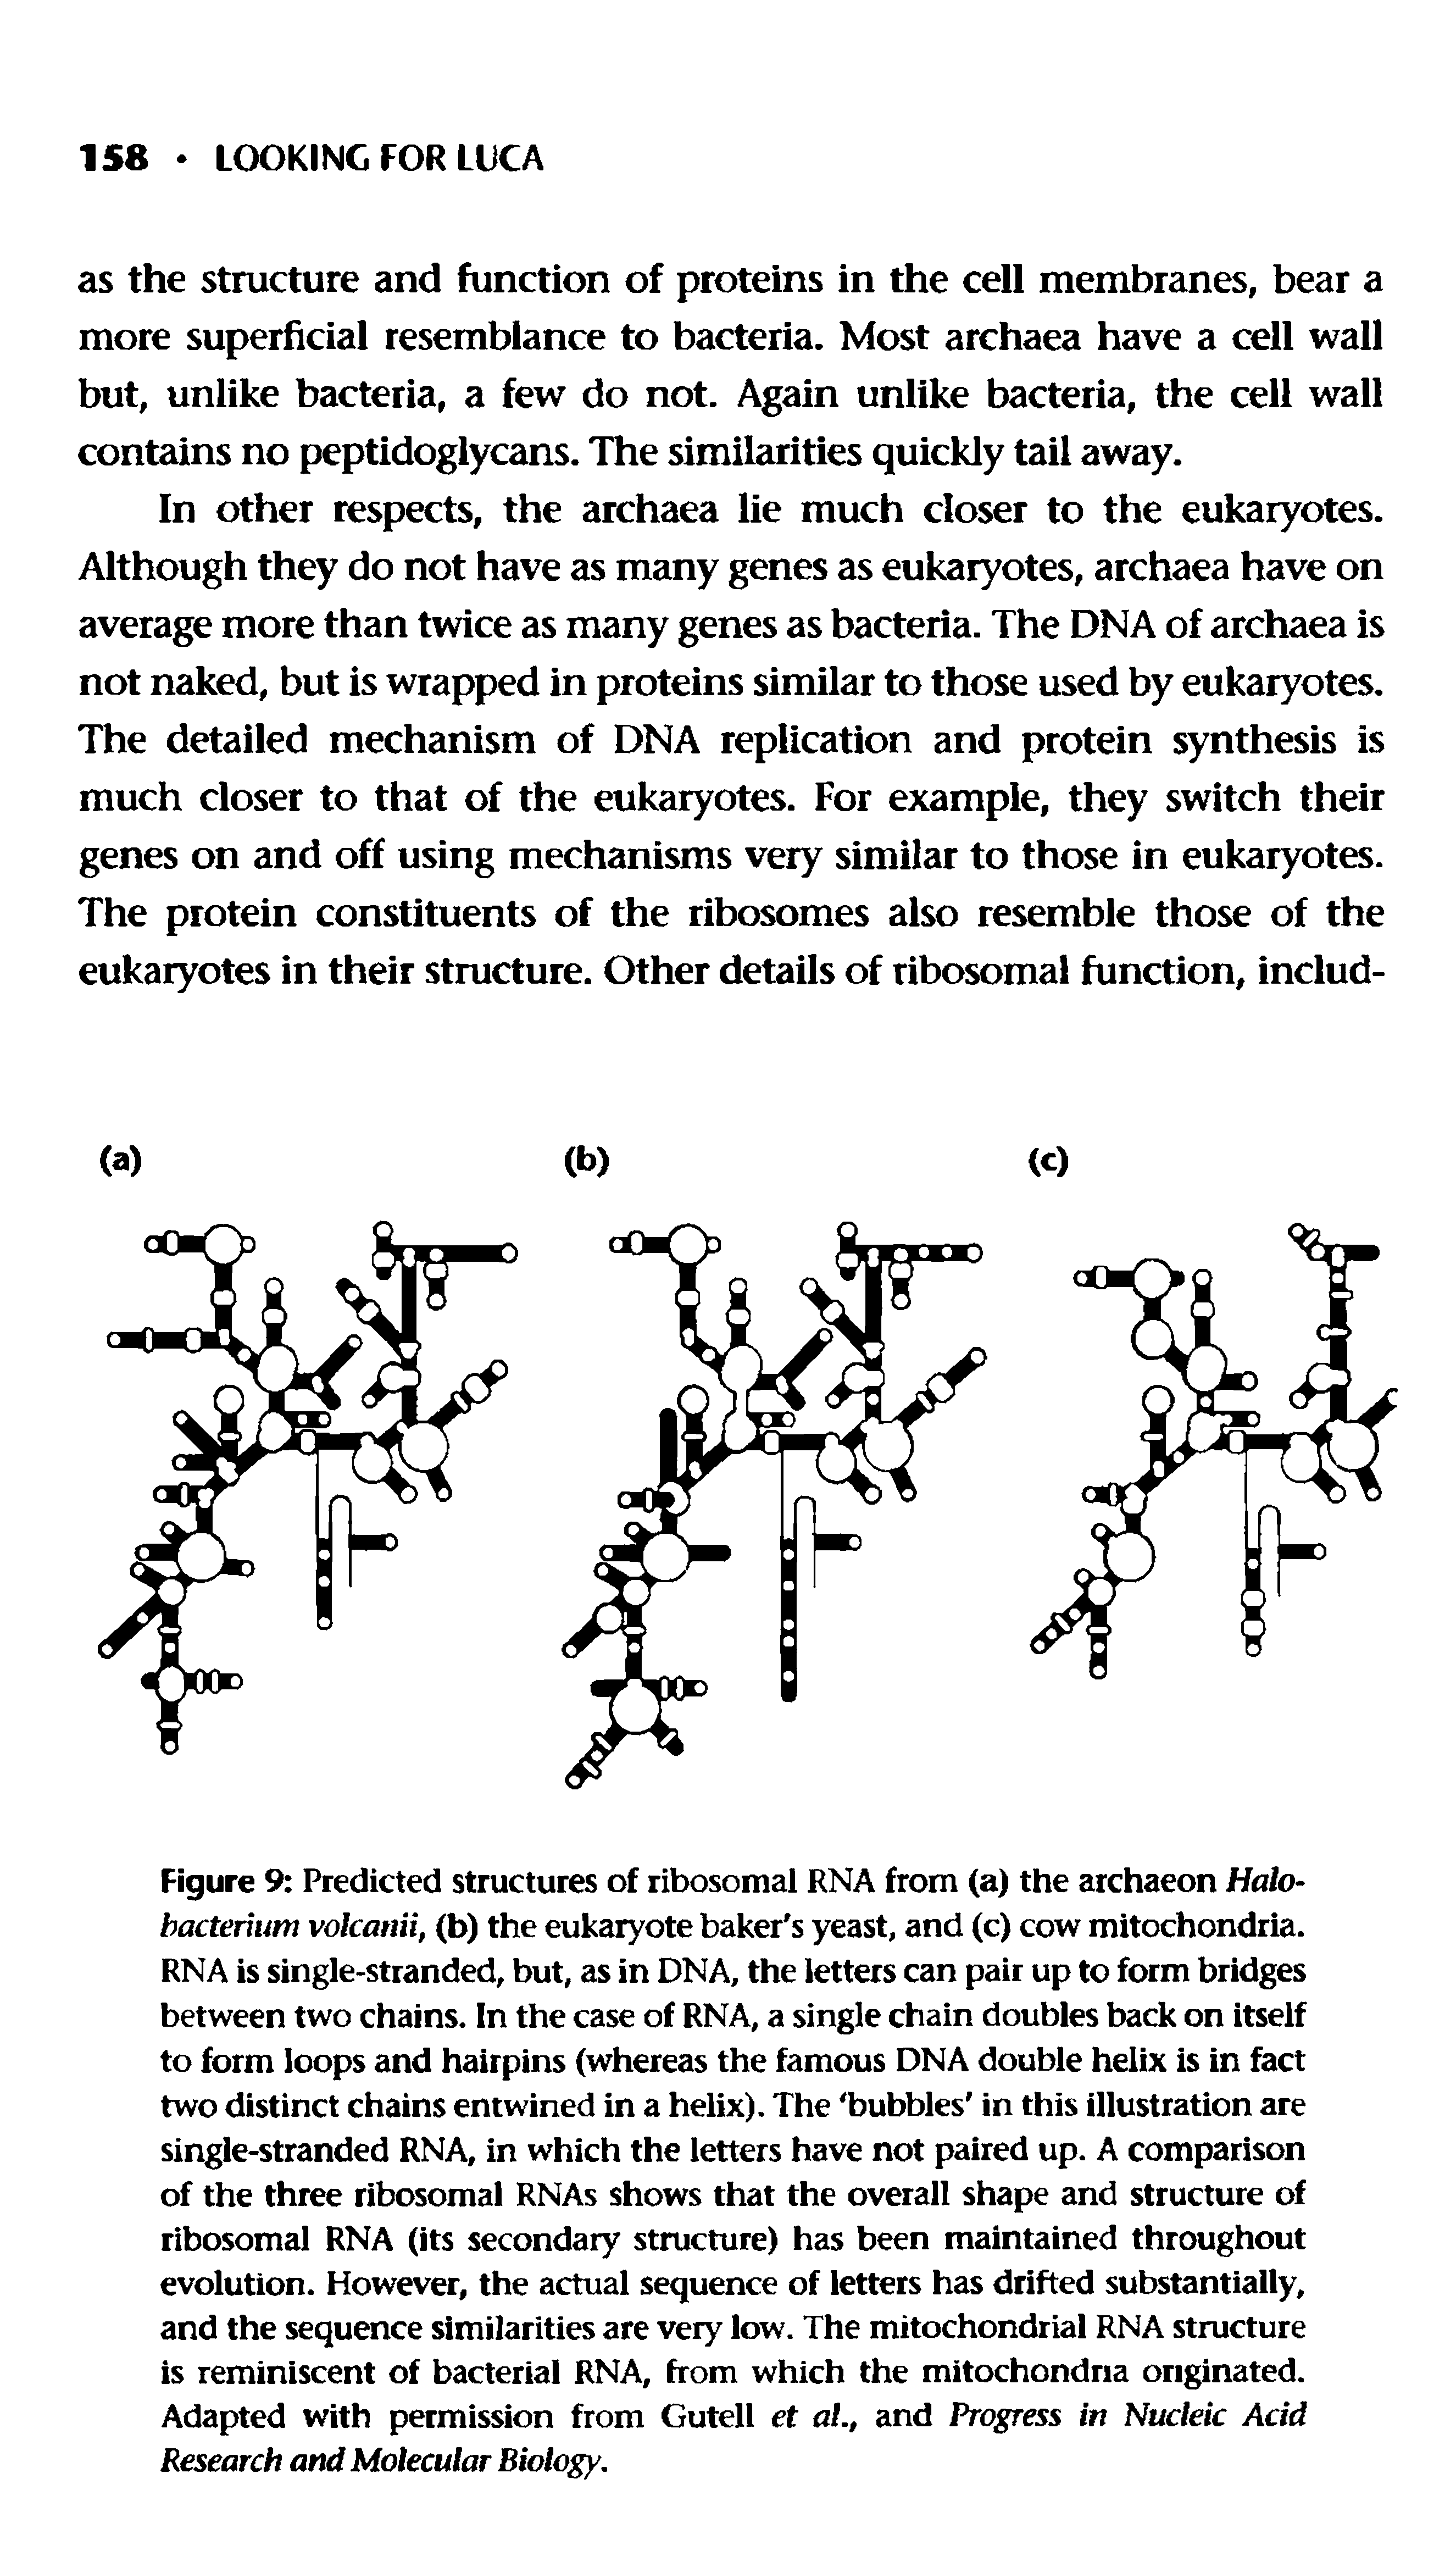 Figure 9 Predicted structures of ribosomal RNA from (a) the archaeon Halo-bacterium volcanii, (b) the eukaryote baker s yeast, and (c) cow mitochondria. RNA is single-stranded, but, as in DNA, the letters can pair up to form bridges between two chains. In the case of RNA, a single chain doubles back on itself to form loops and hairpins (whereas the famous DNA double helix is in fact two distinct chains entwined in a helix). The bubbles in this illustration are single-stranded RNA, in which the letters have not paired up. A comparison of the three ribosomal RNAs shows that the overall shape and structure of ribosomal RNA (its secondary structure) has been maintained throughout evolution. However, the actual sequence of letters has drifted substantially, and the sequence similarities are very low. The mitochondrial RNA structure is reminiscent of bacterial RNA, from which the mitochondria originated. Adapted with permission from Gutell et al.t and Progress in Nucleic Acid Research and Molecular Biology.